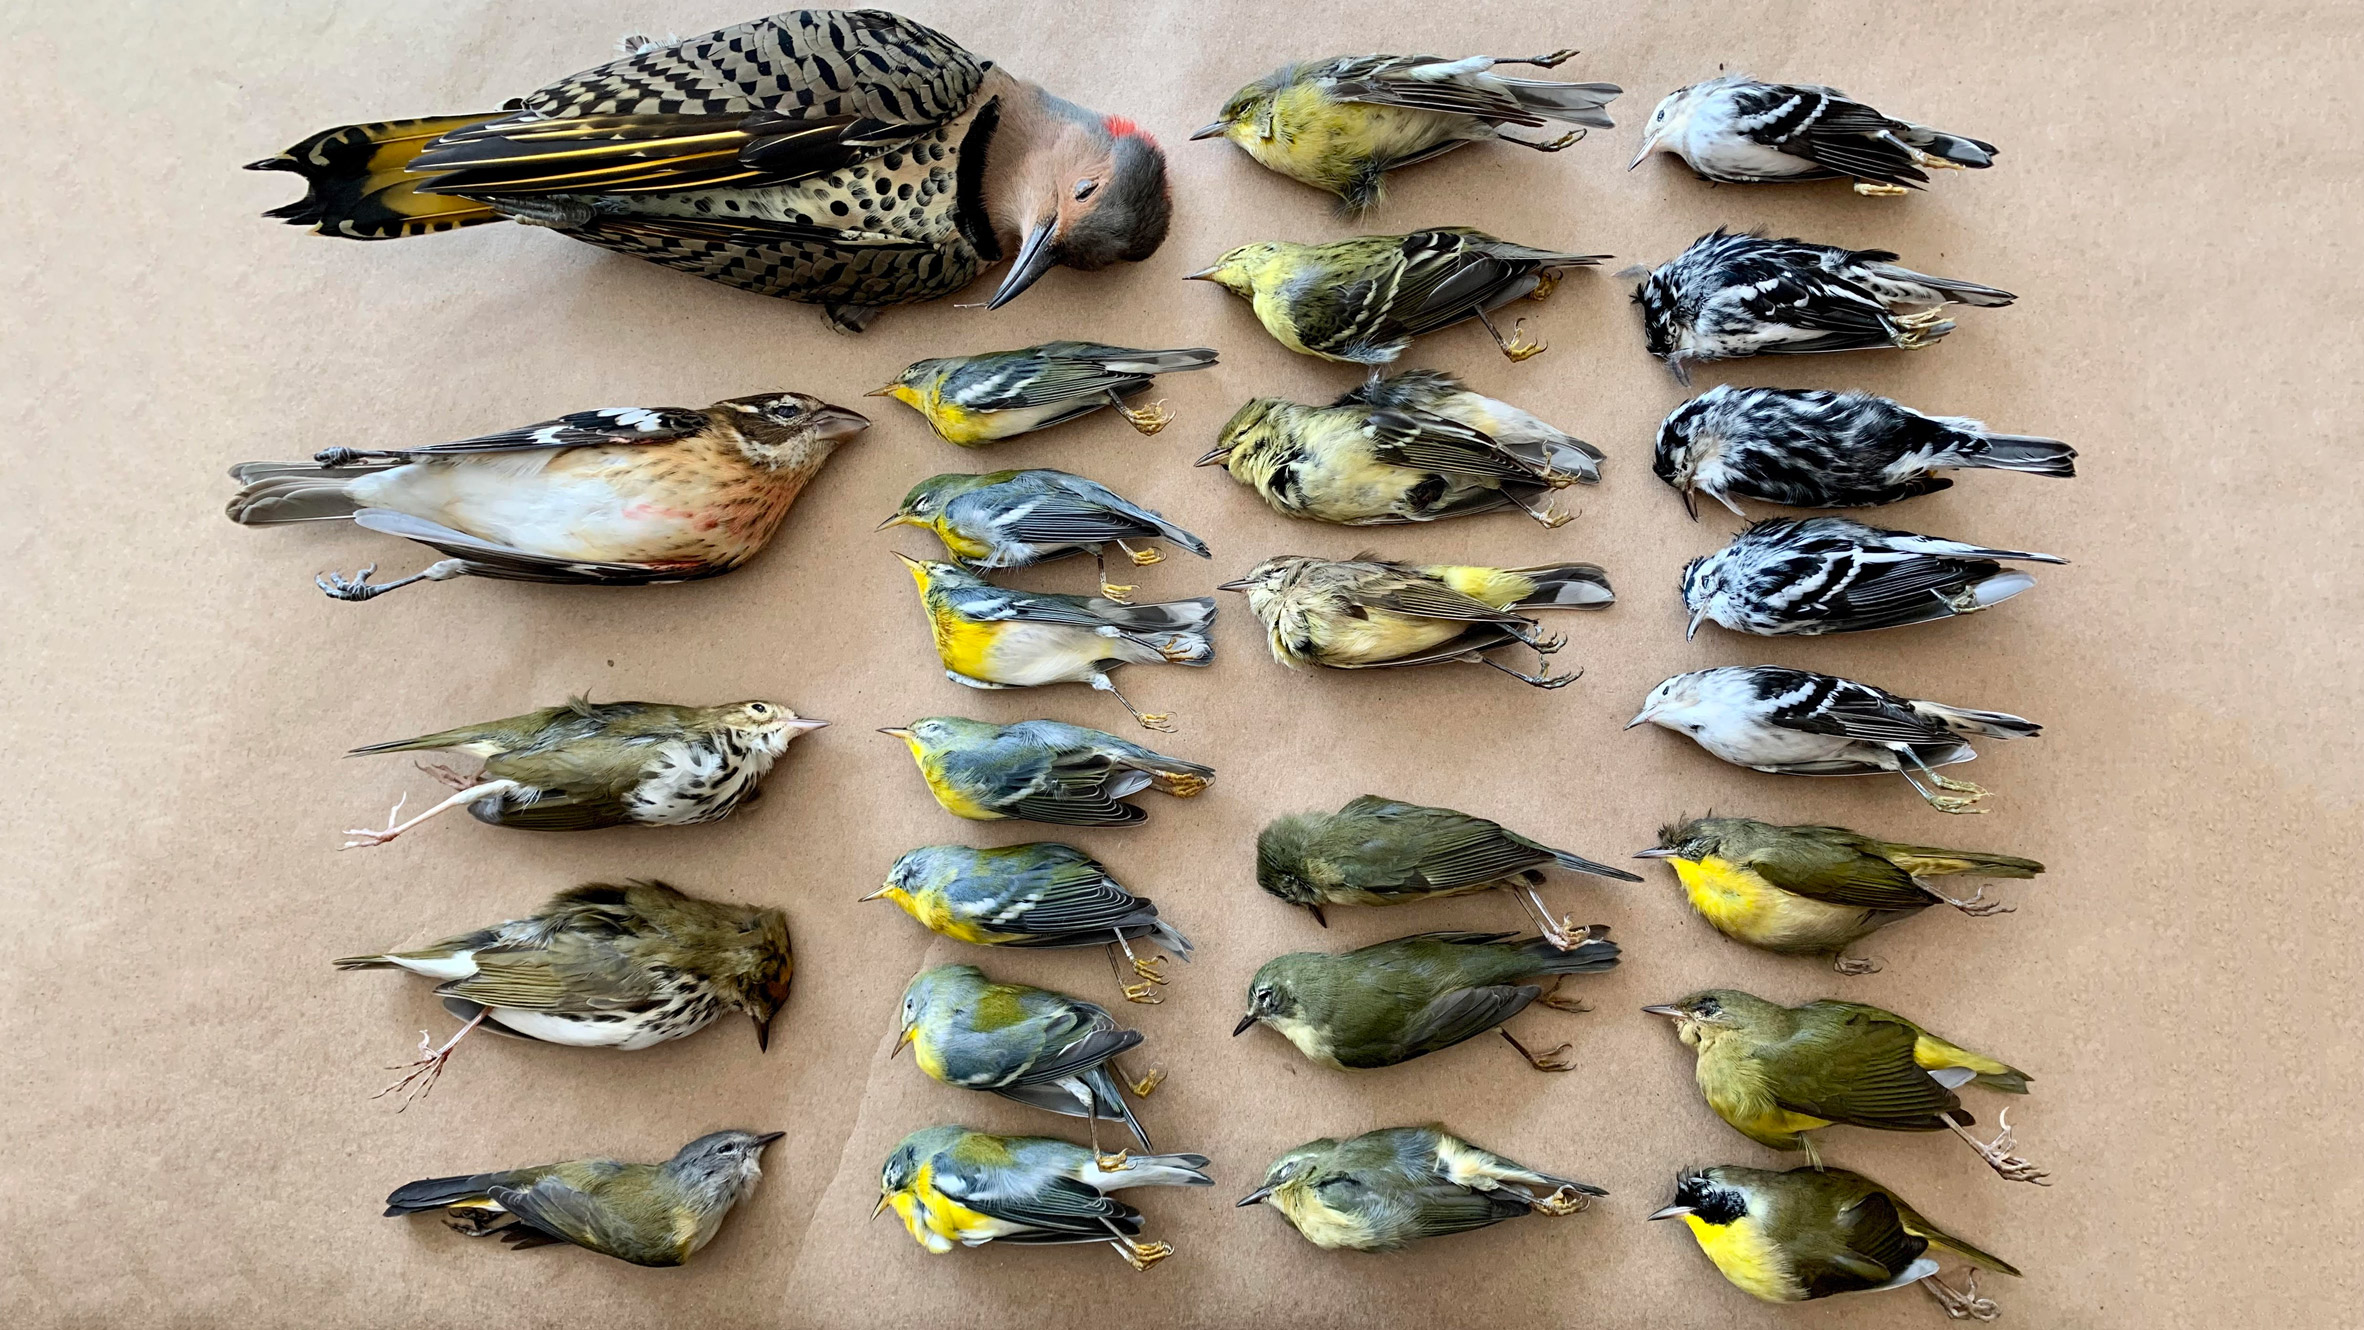 Bird carcasses collected from the World Trade Center after collisions